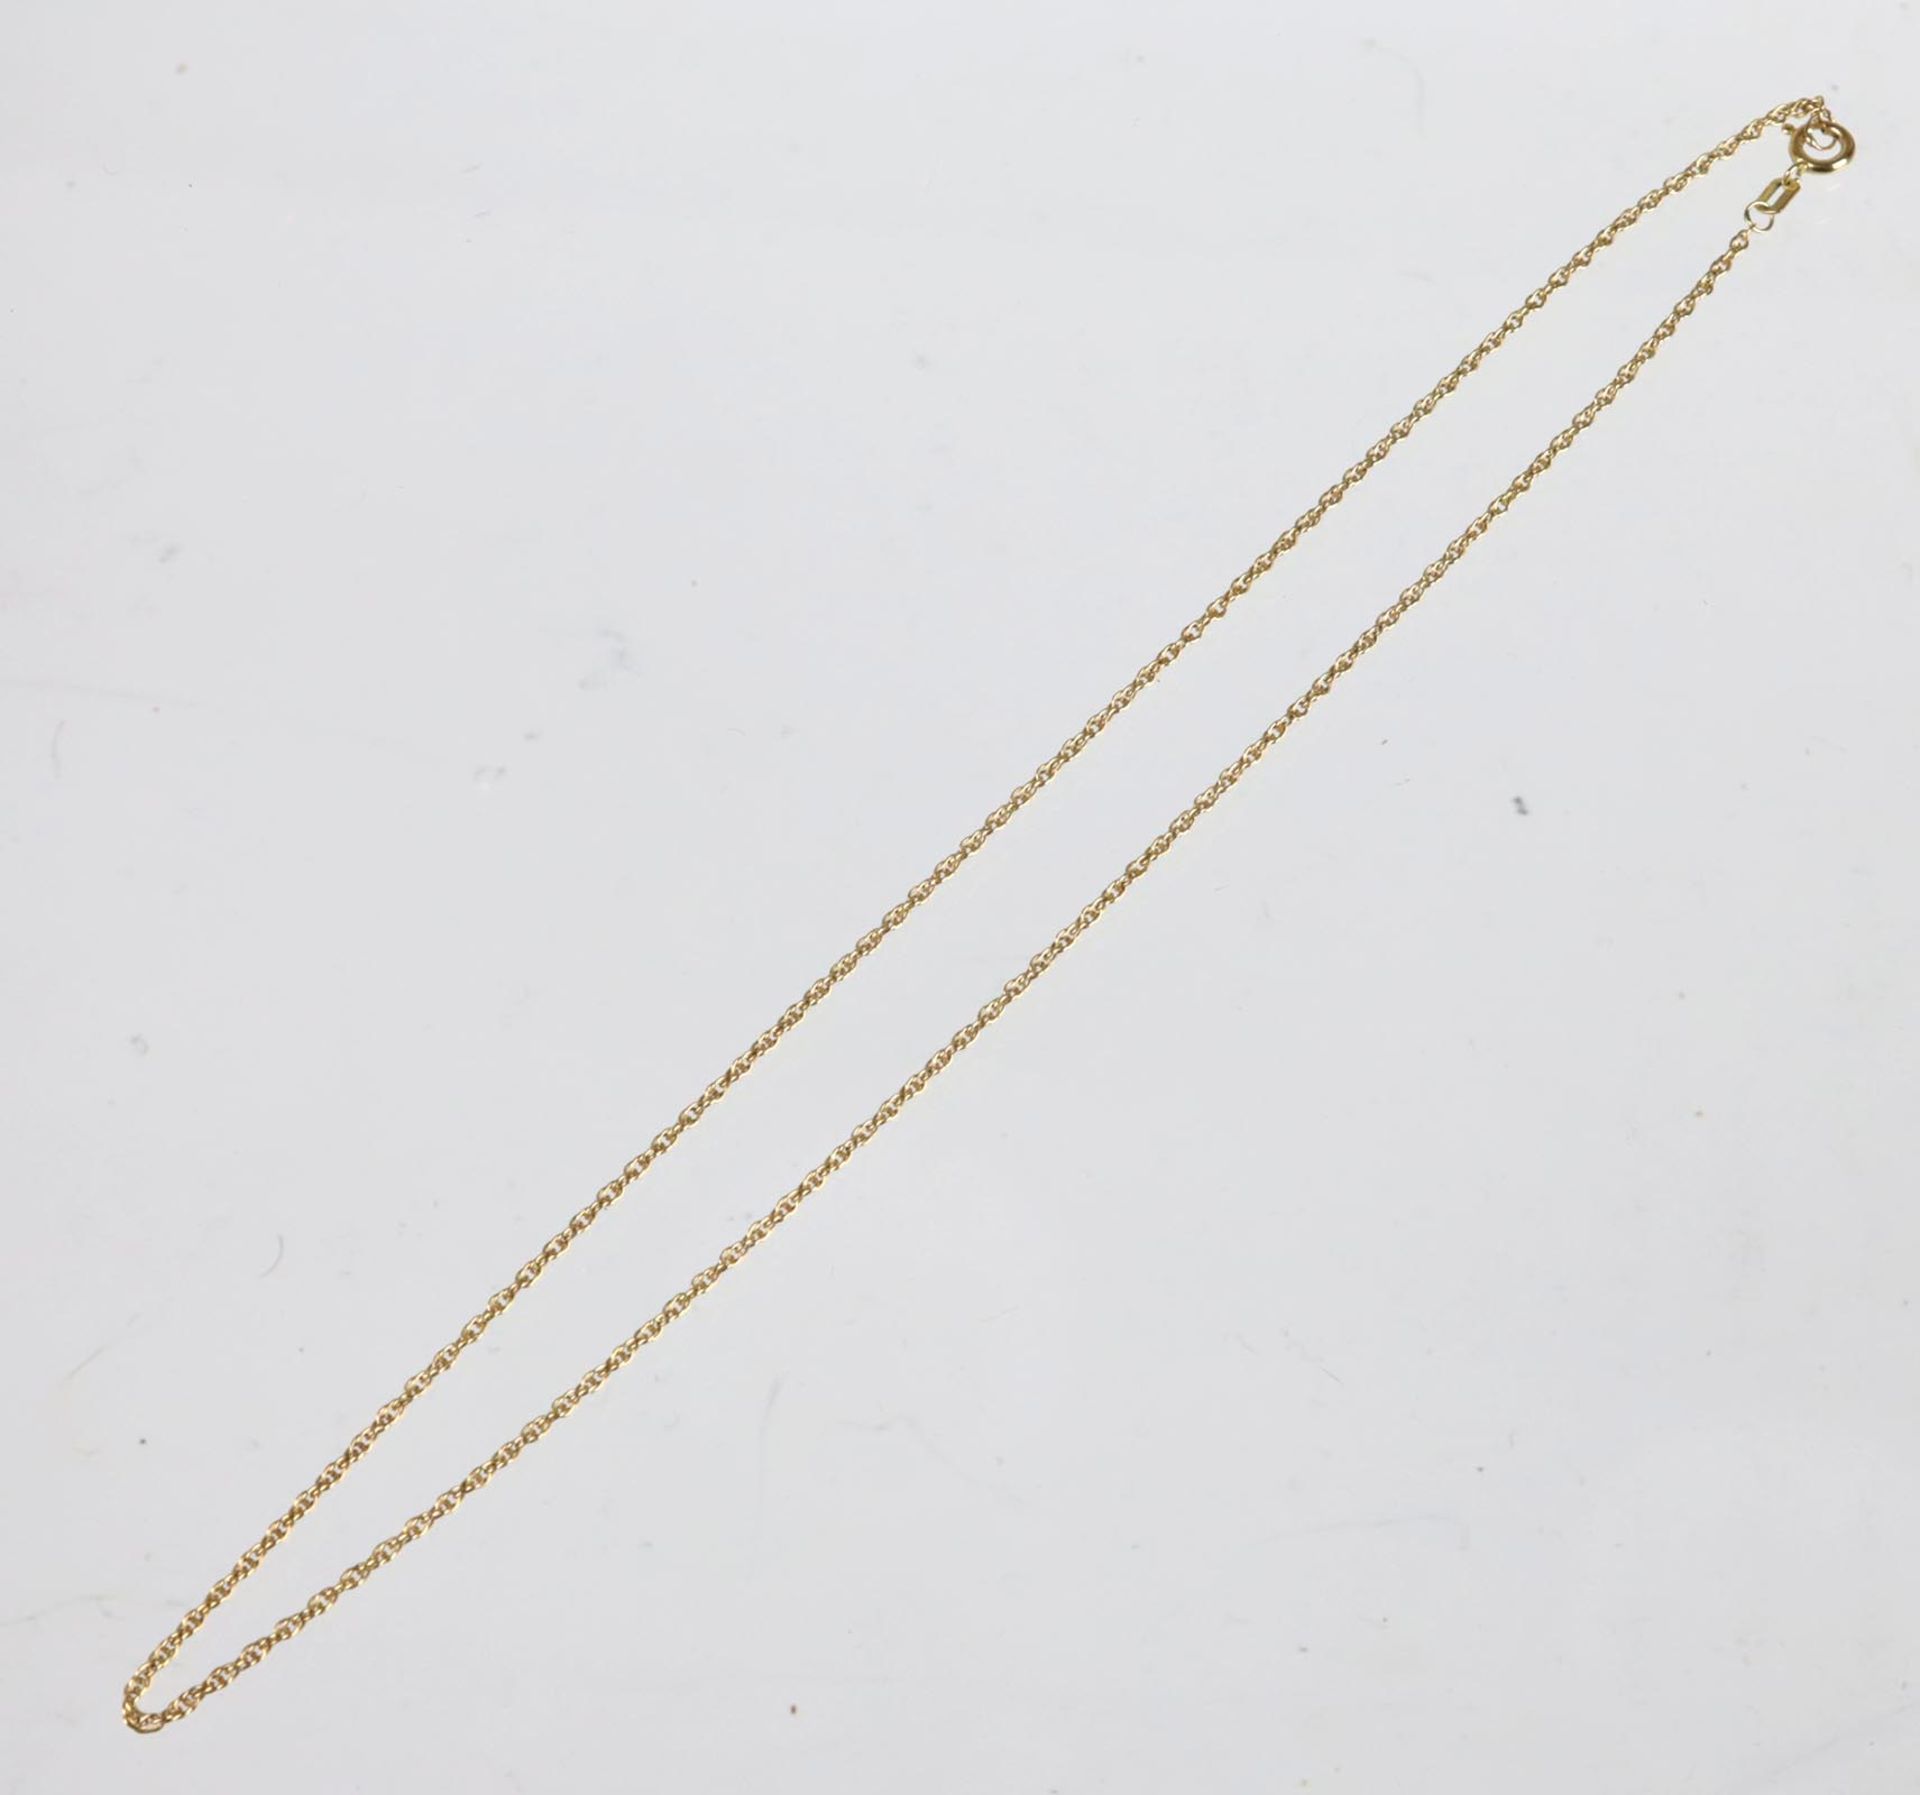 Gold Kette - GG 585 - Image 2 of 2